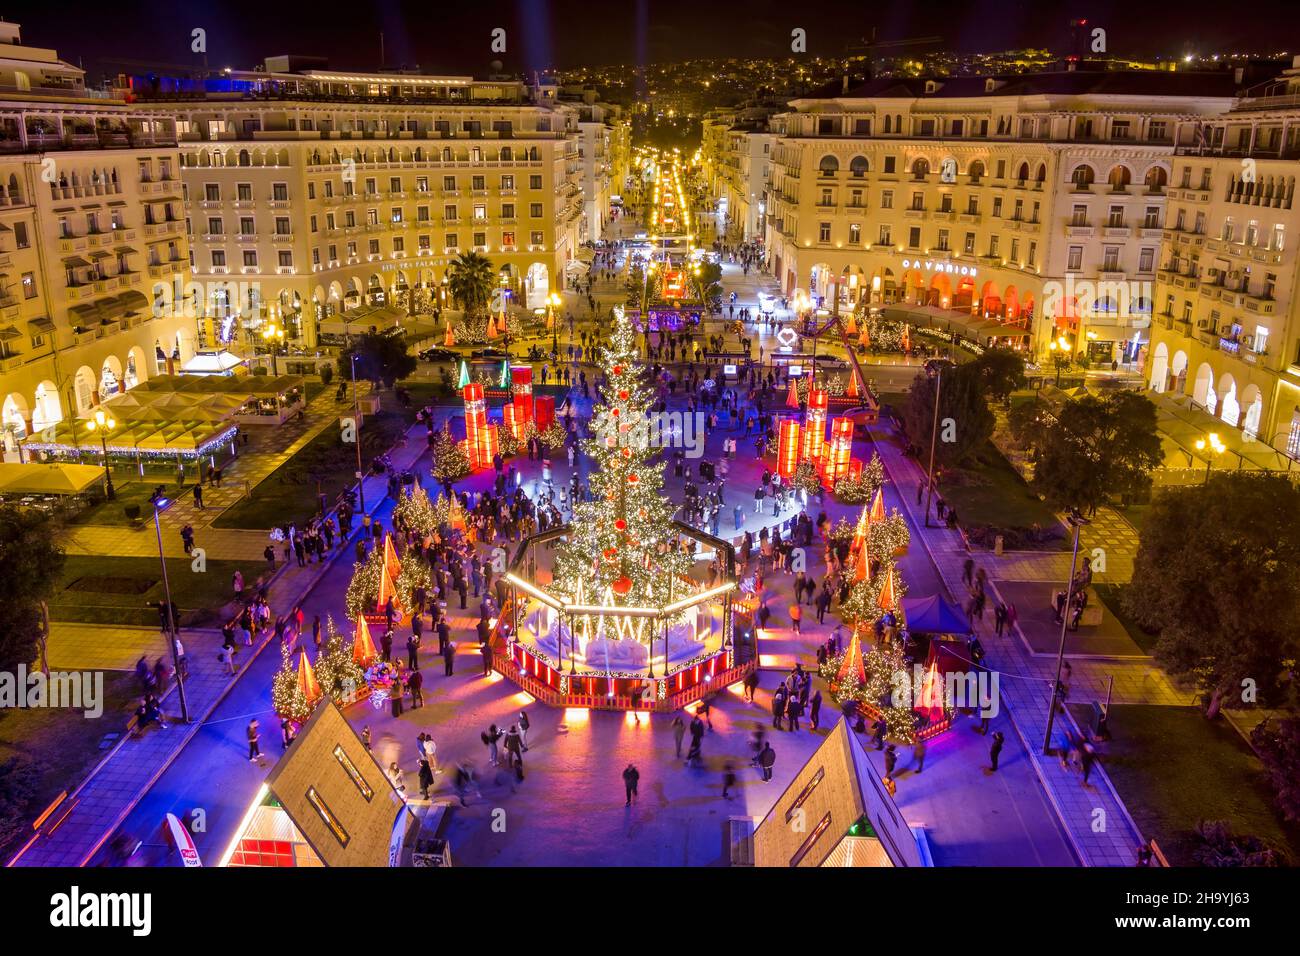 Aerial view of Aristotelous Square in Thessaloniki, Greece, which was decorated for Christmas Stock Photo